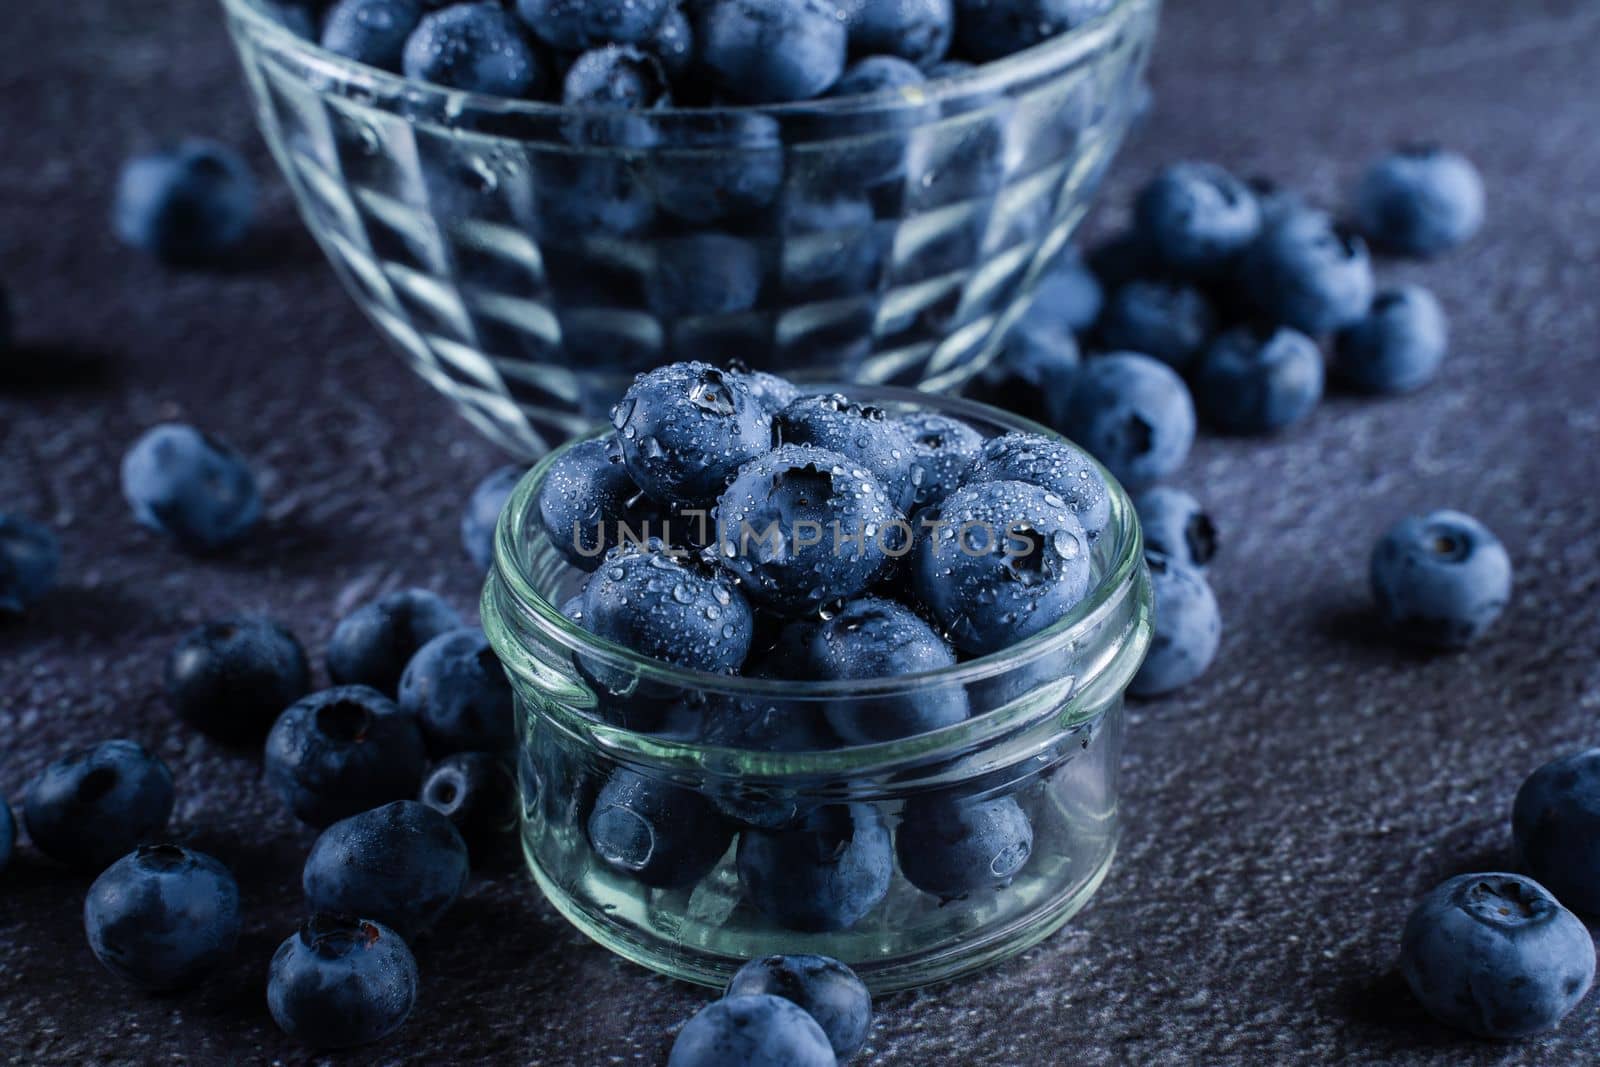 Blueberries organic natural berry with water drops on dark background close-up. Blueberry in glass bowl plate. by Rabizo